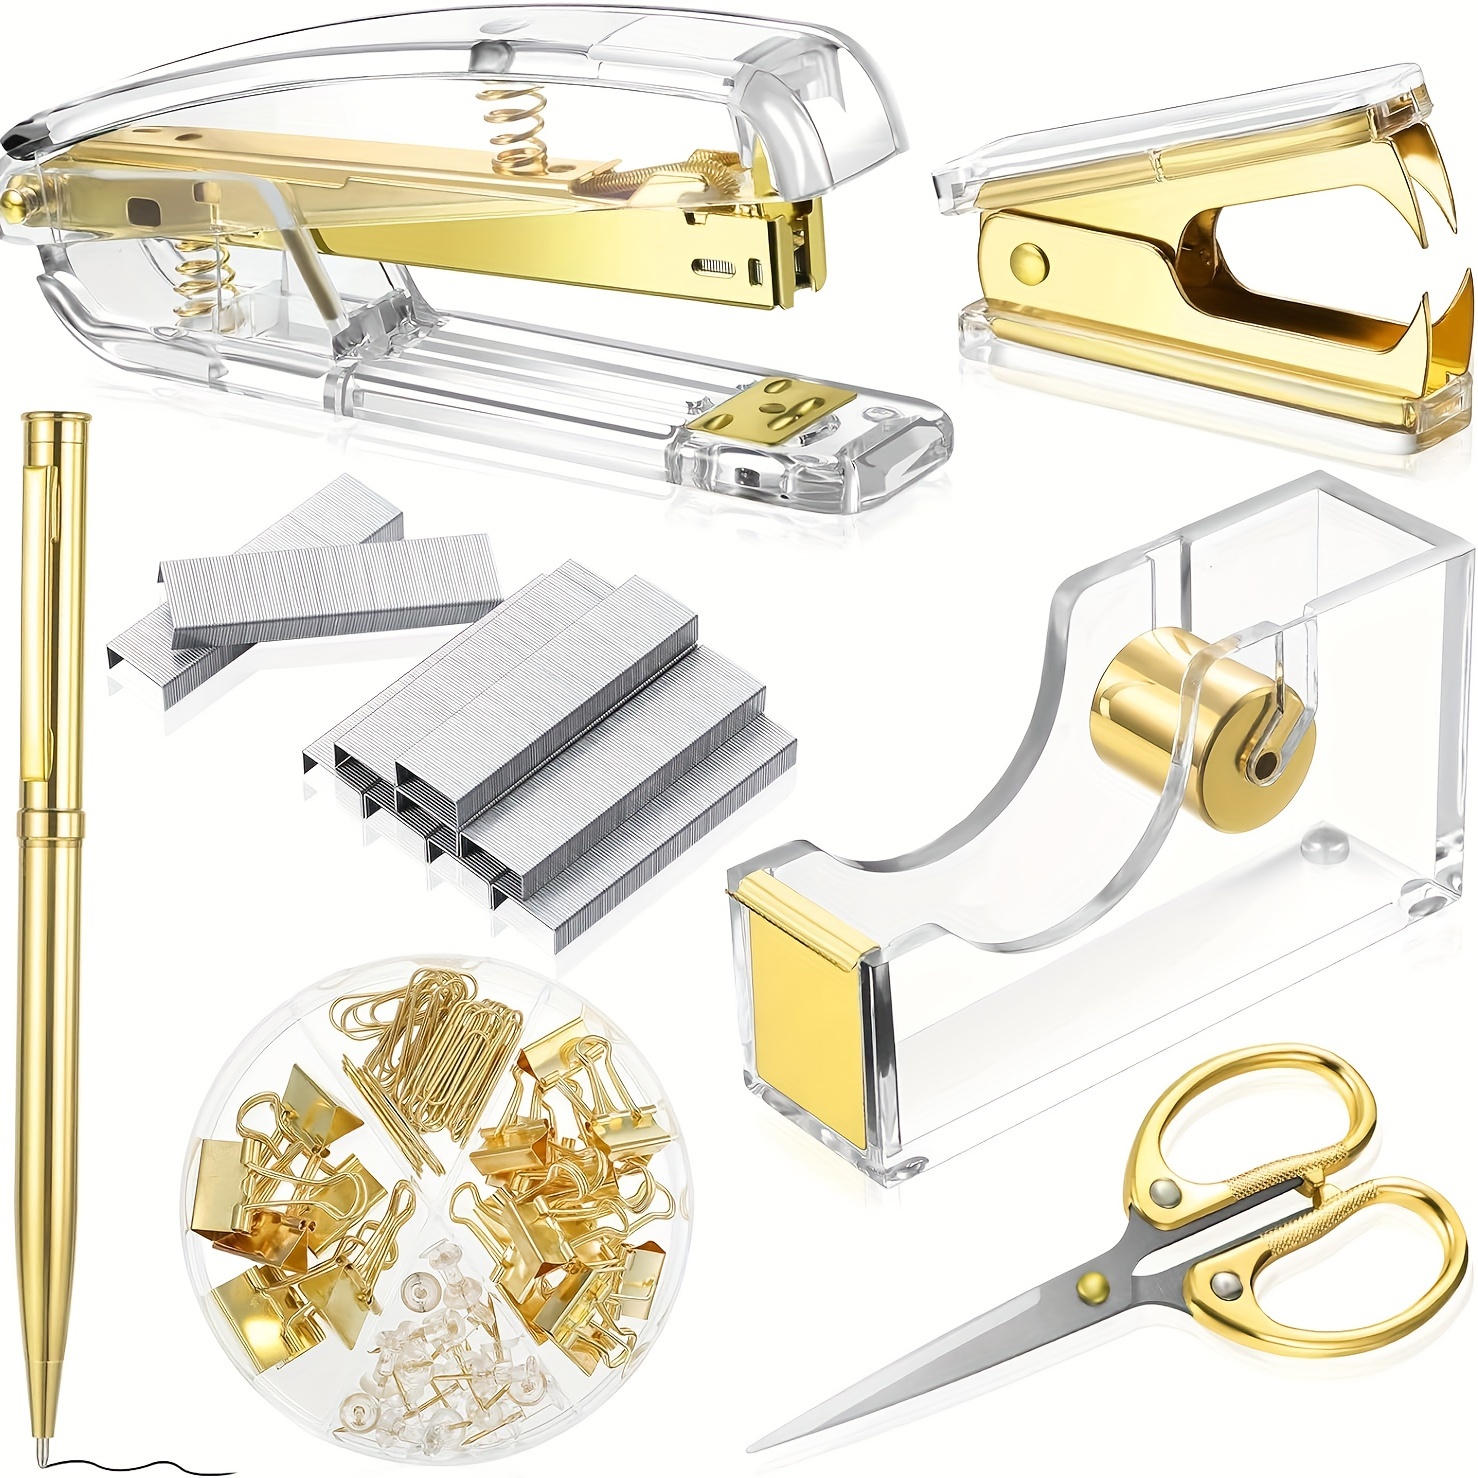 

Gold Acrylic Desktop Stapler Set With Manual Operation Mode - Includes Staple Remover, Tape Dispenser, Binder Clips, Paper Clips, Ballpoint Pen, Scissors, And 1000 Pieces 26/6 Staples